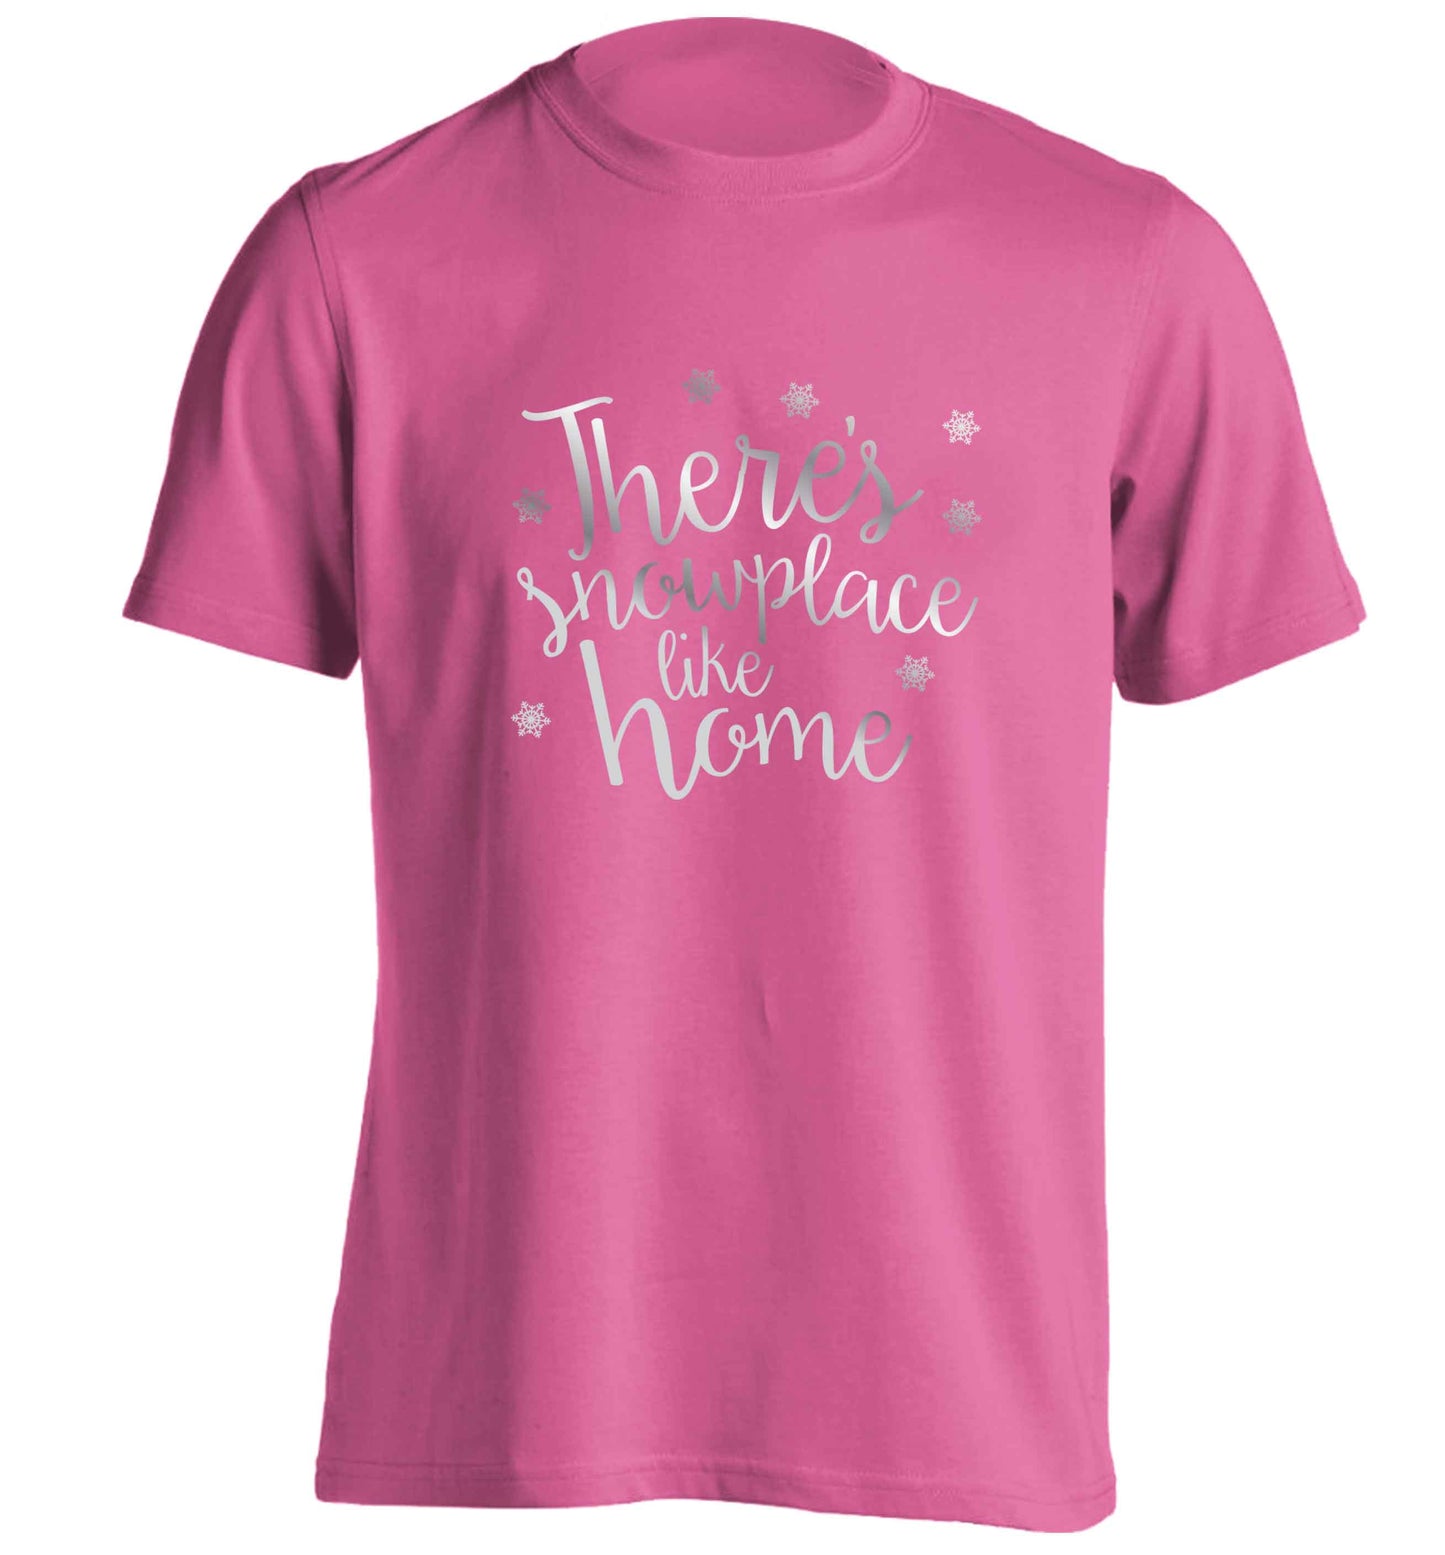 There's snowplace like home - metallic silver adults unisex pink Tshirt 2XL